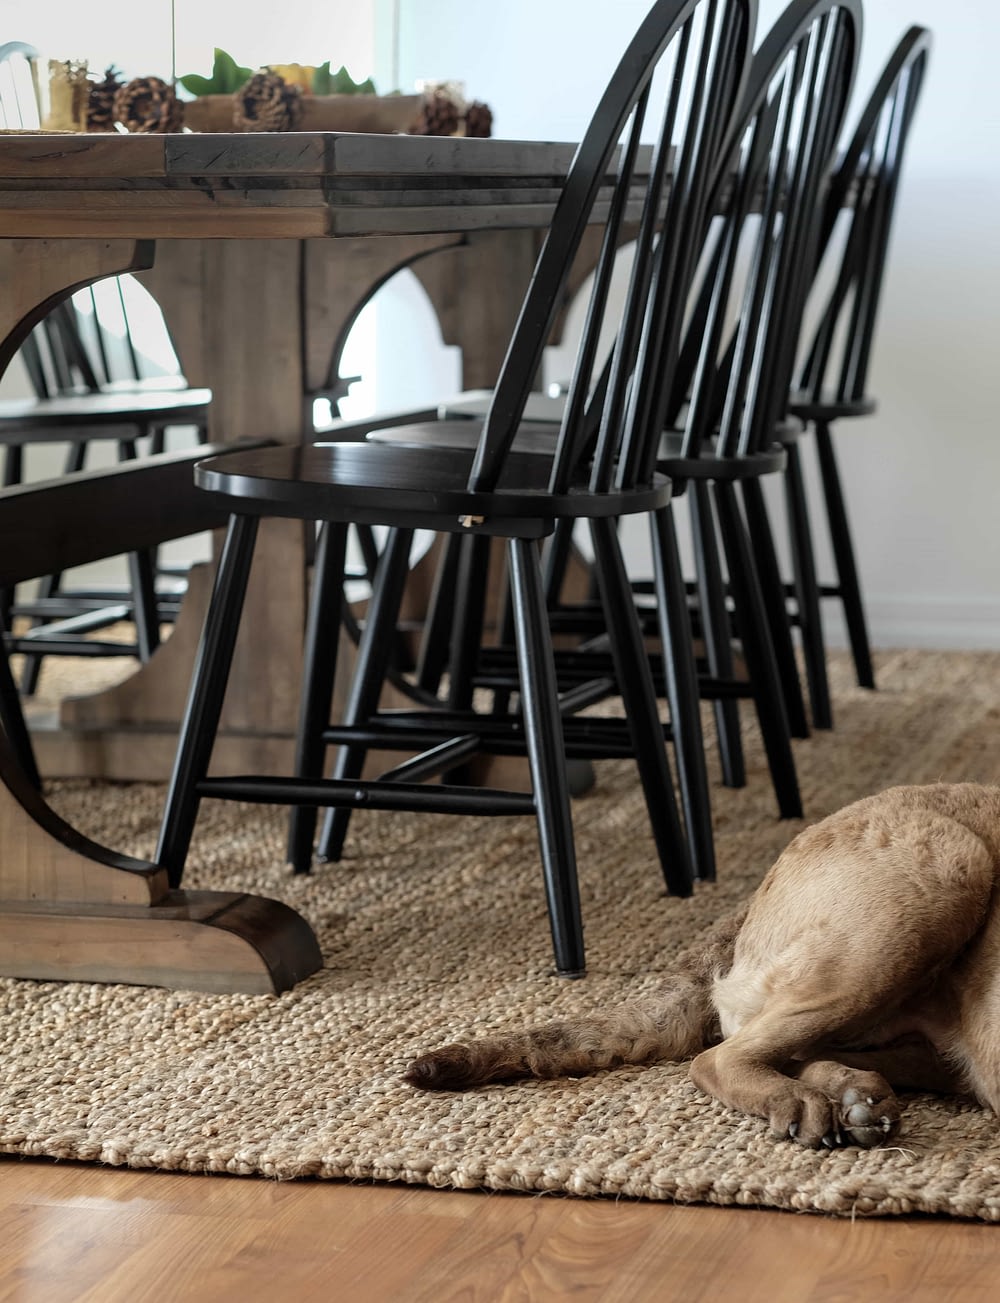 Jute Rug Review. Jute rug in dining room with table and chairs on it